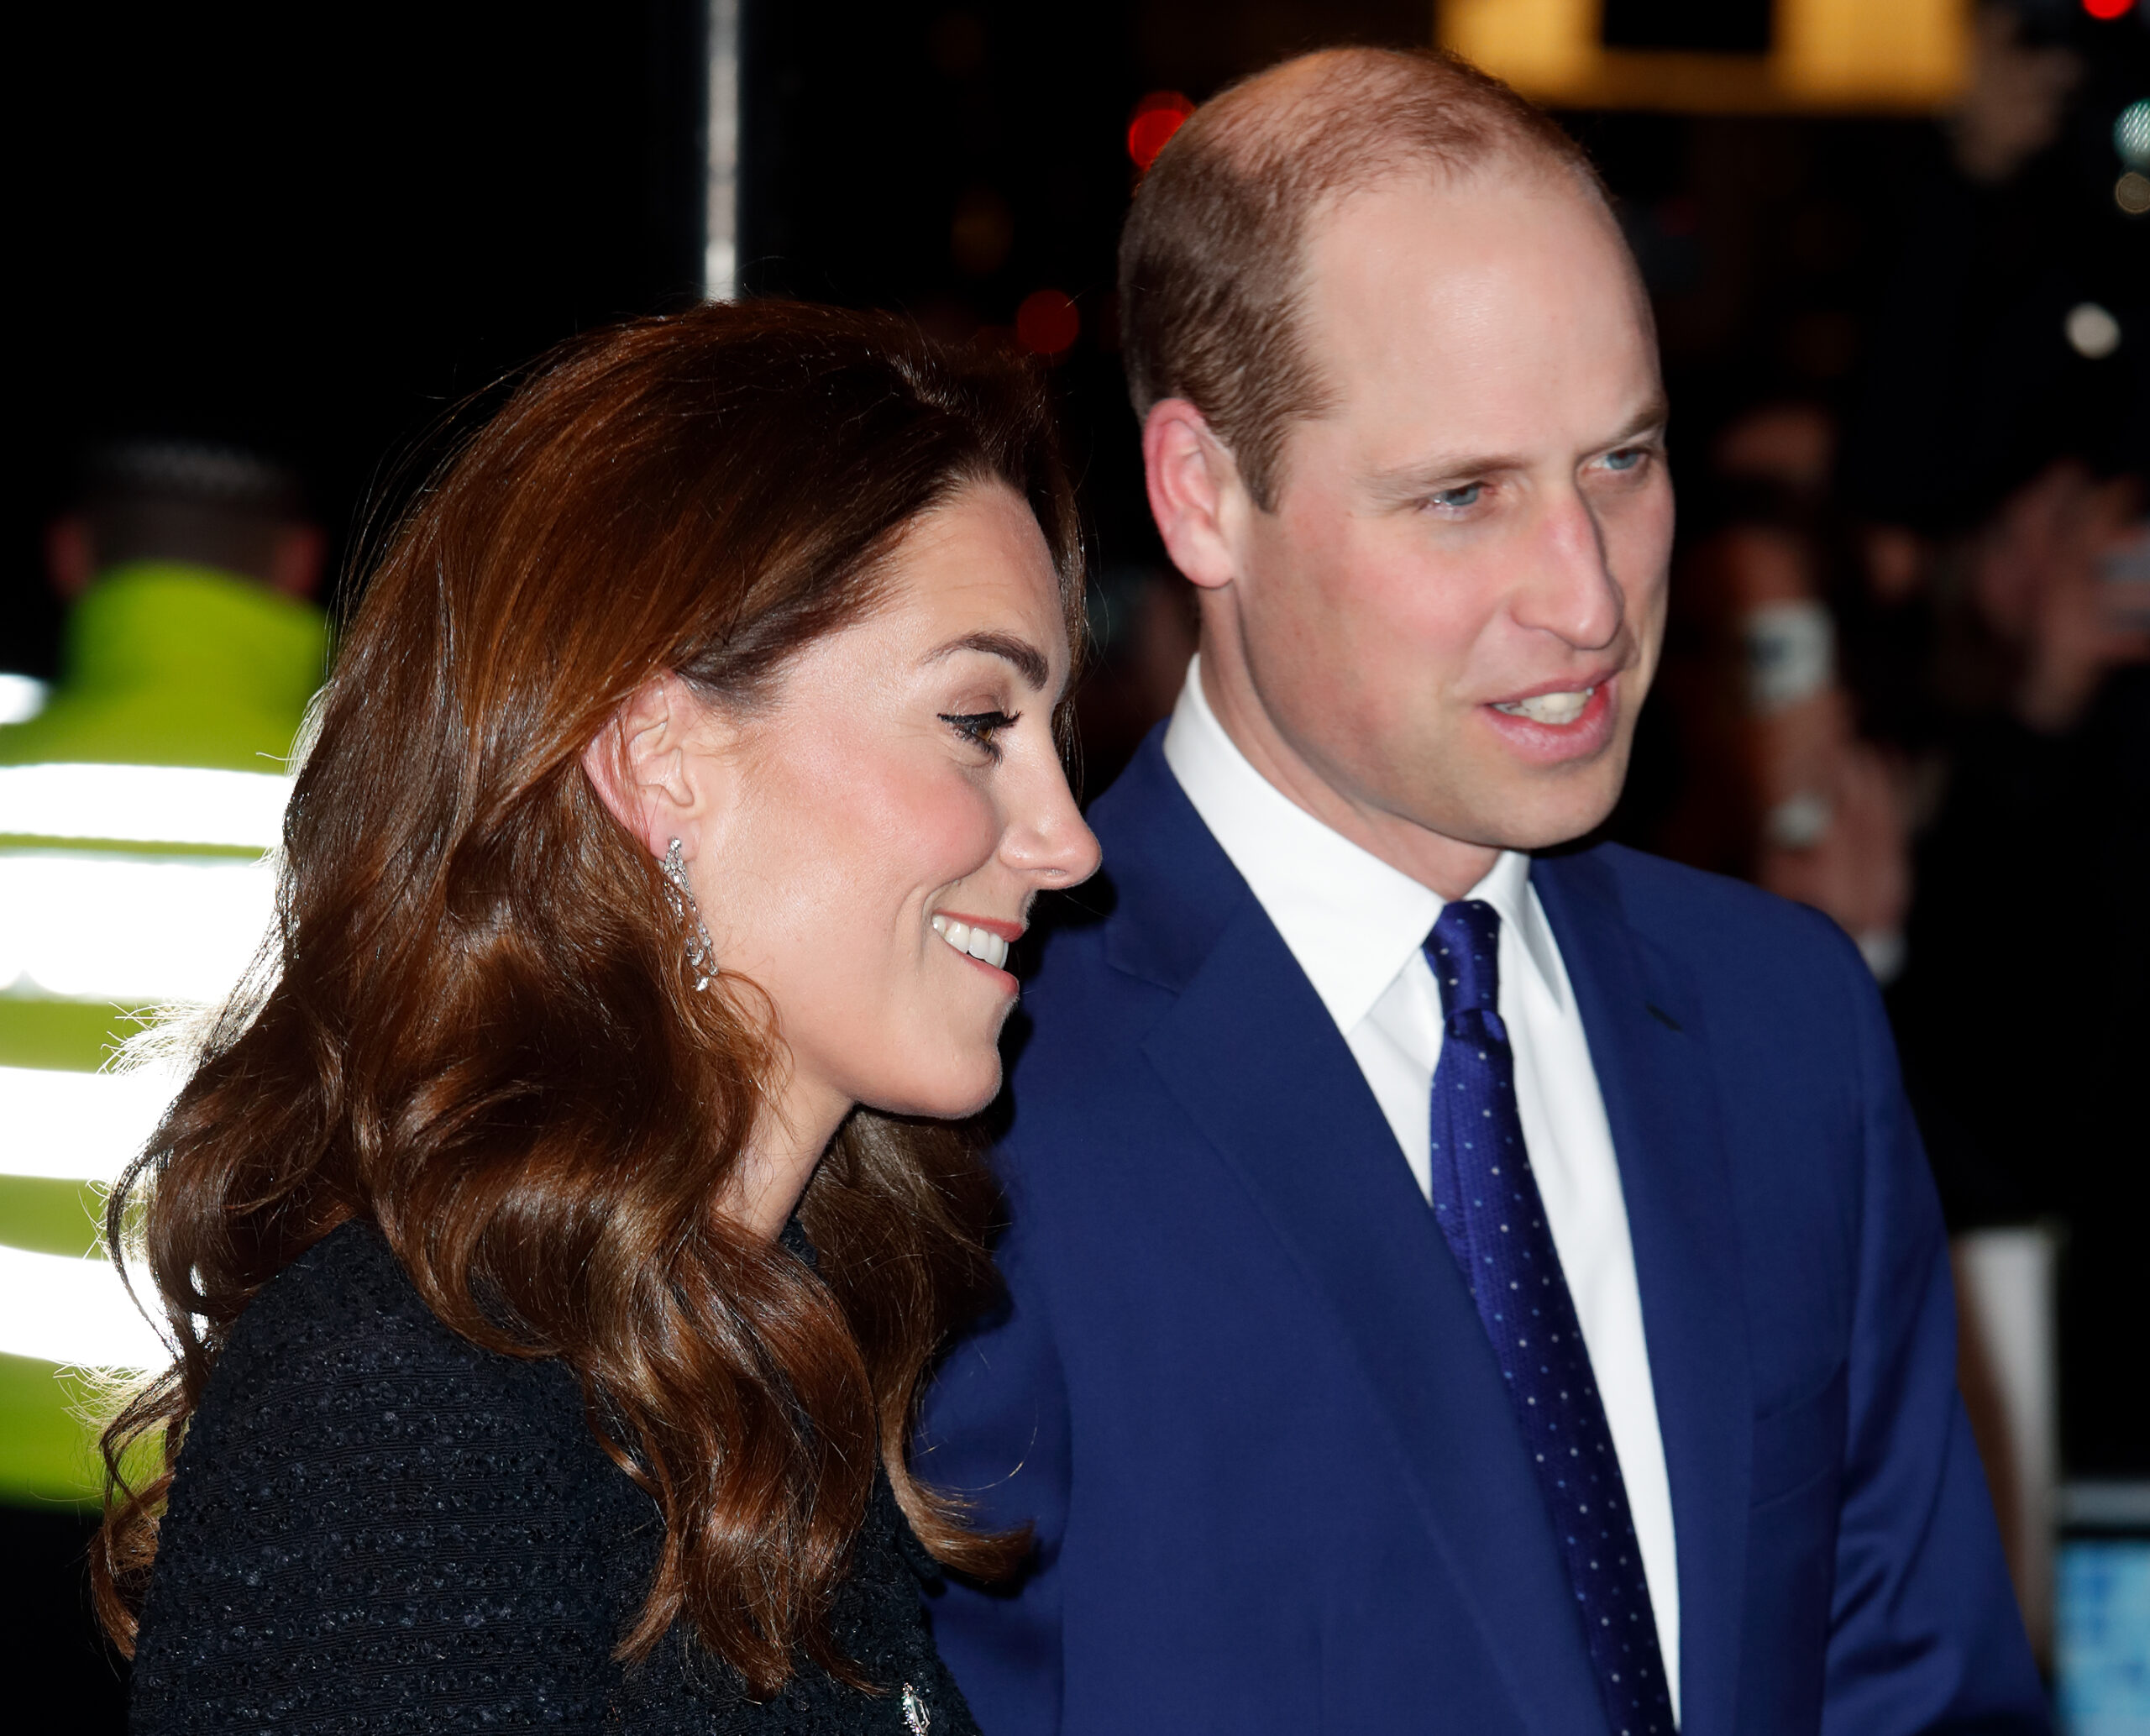 With Prince Williams